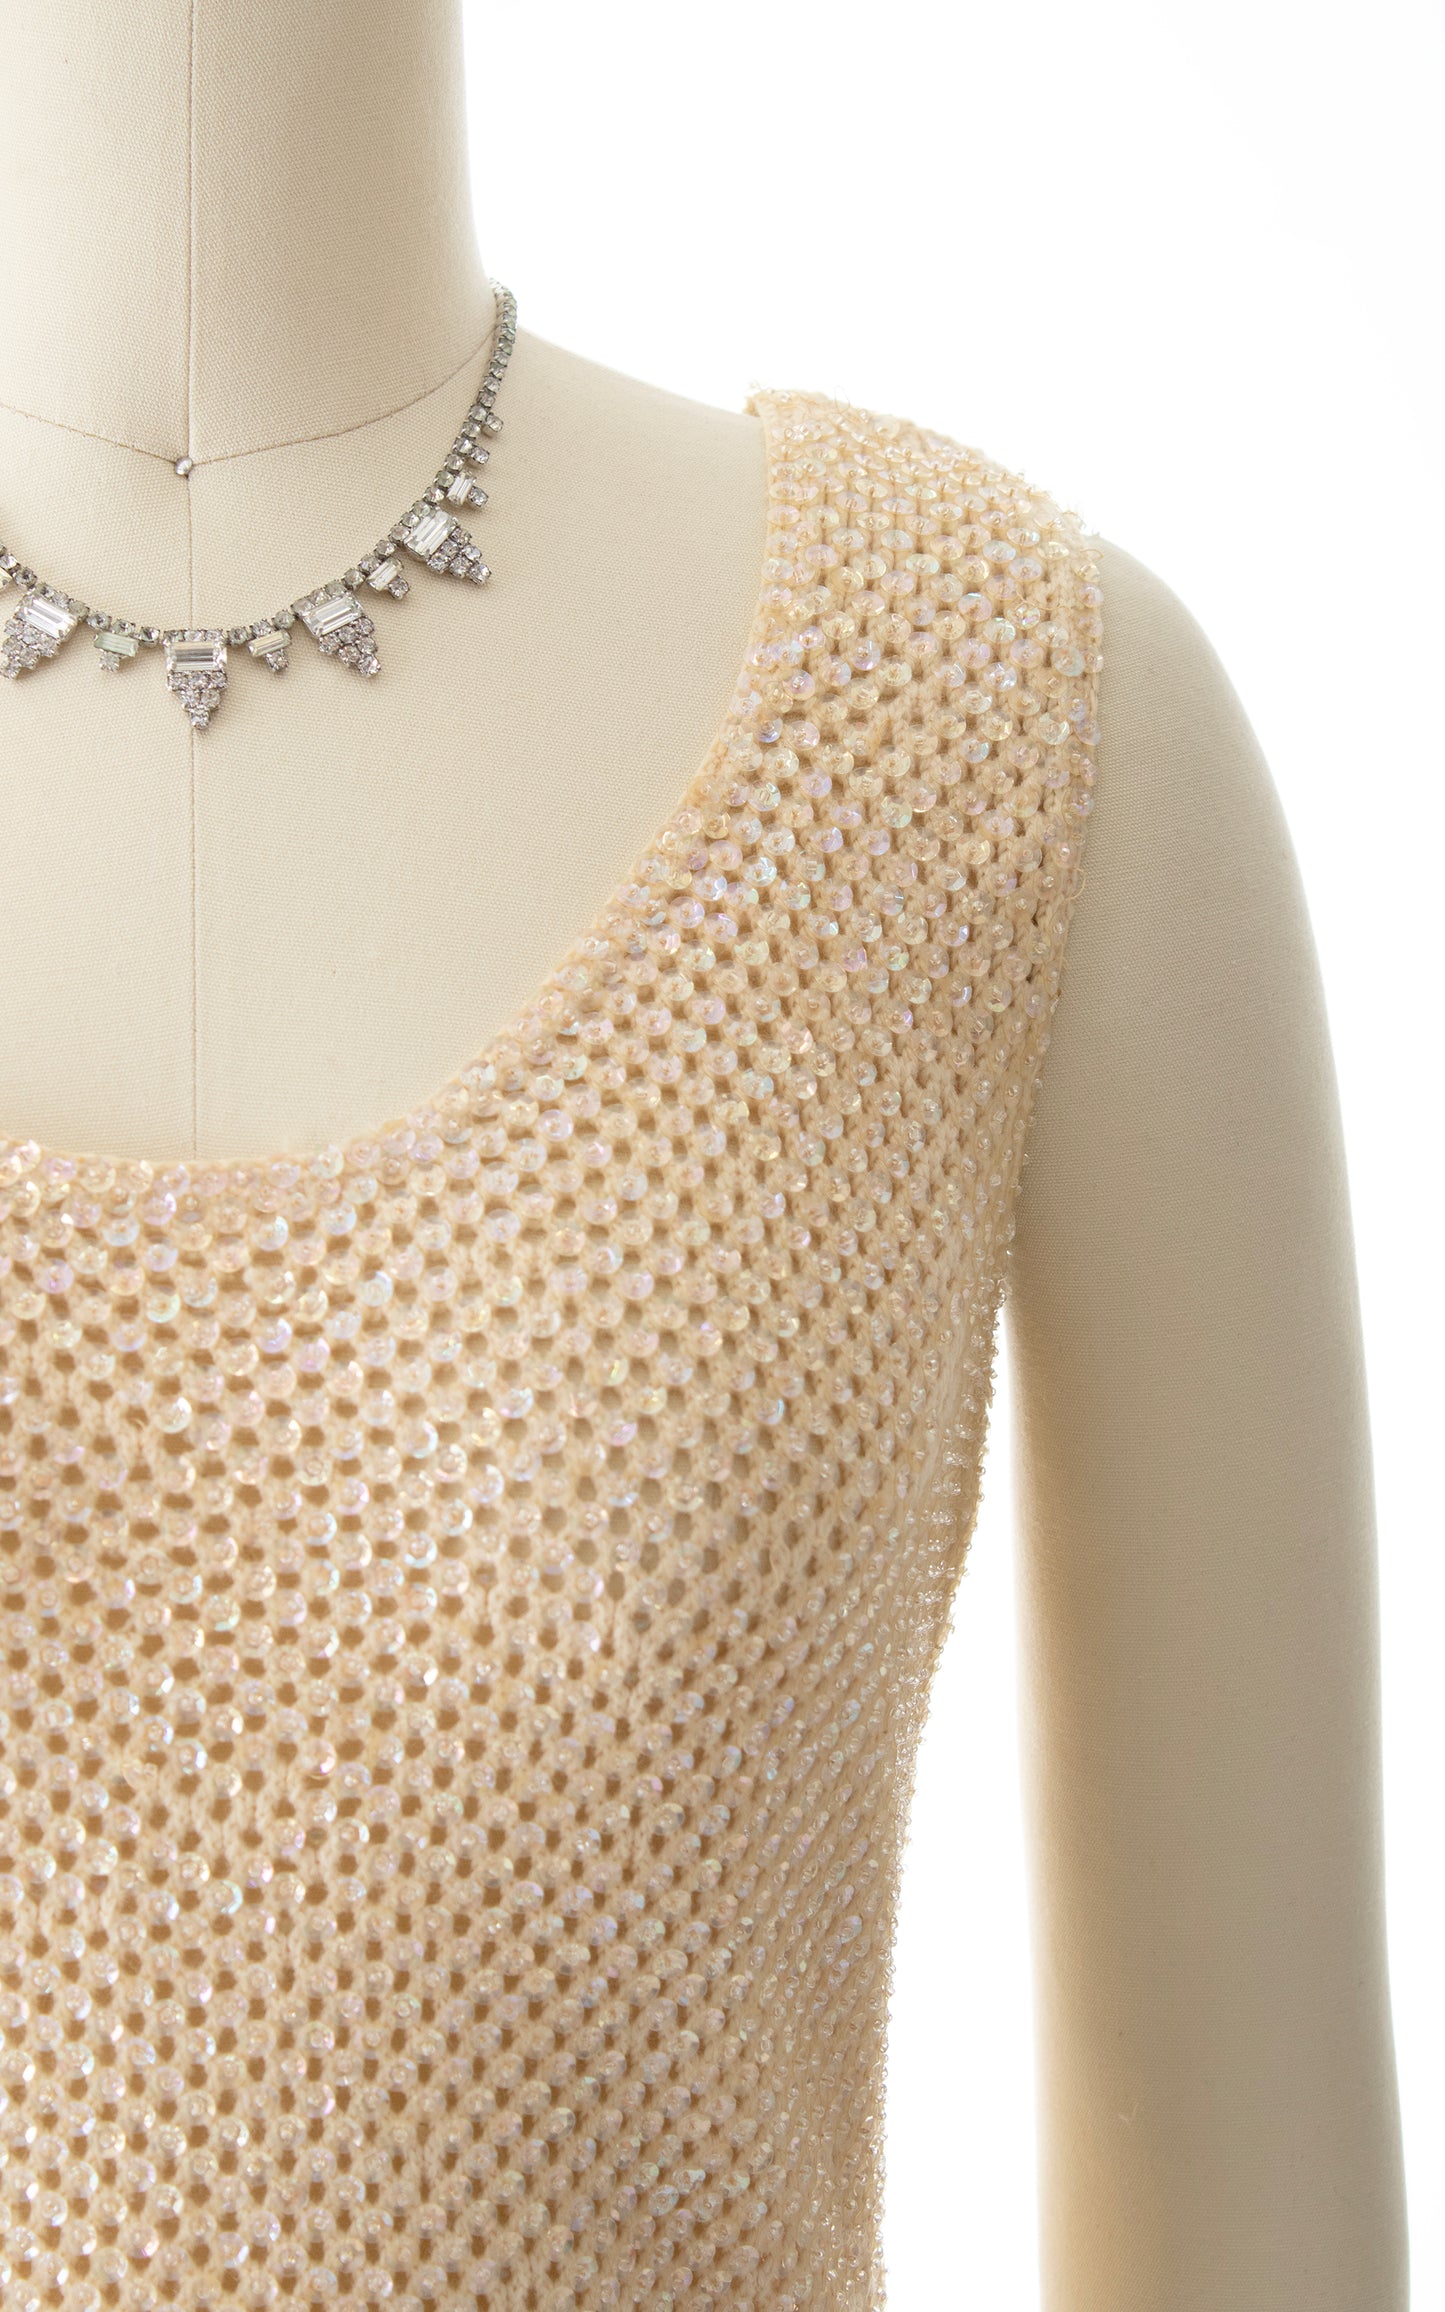 NEW ARRIVAL || 1950s Sequin Beaded Knit Wool Sweater Dress | x-small/small